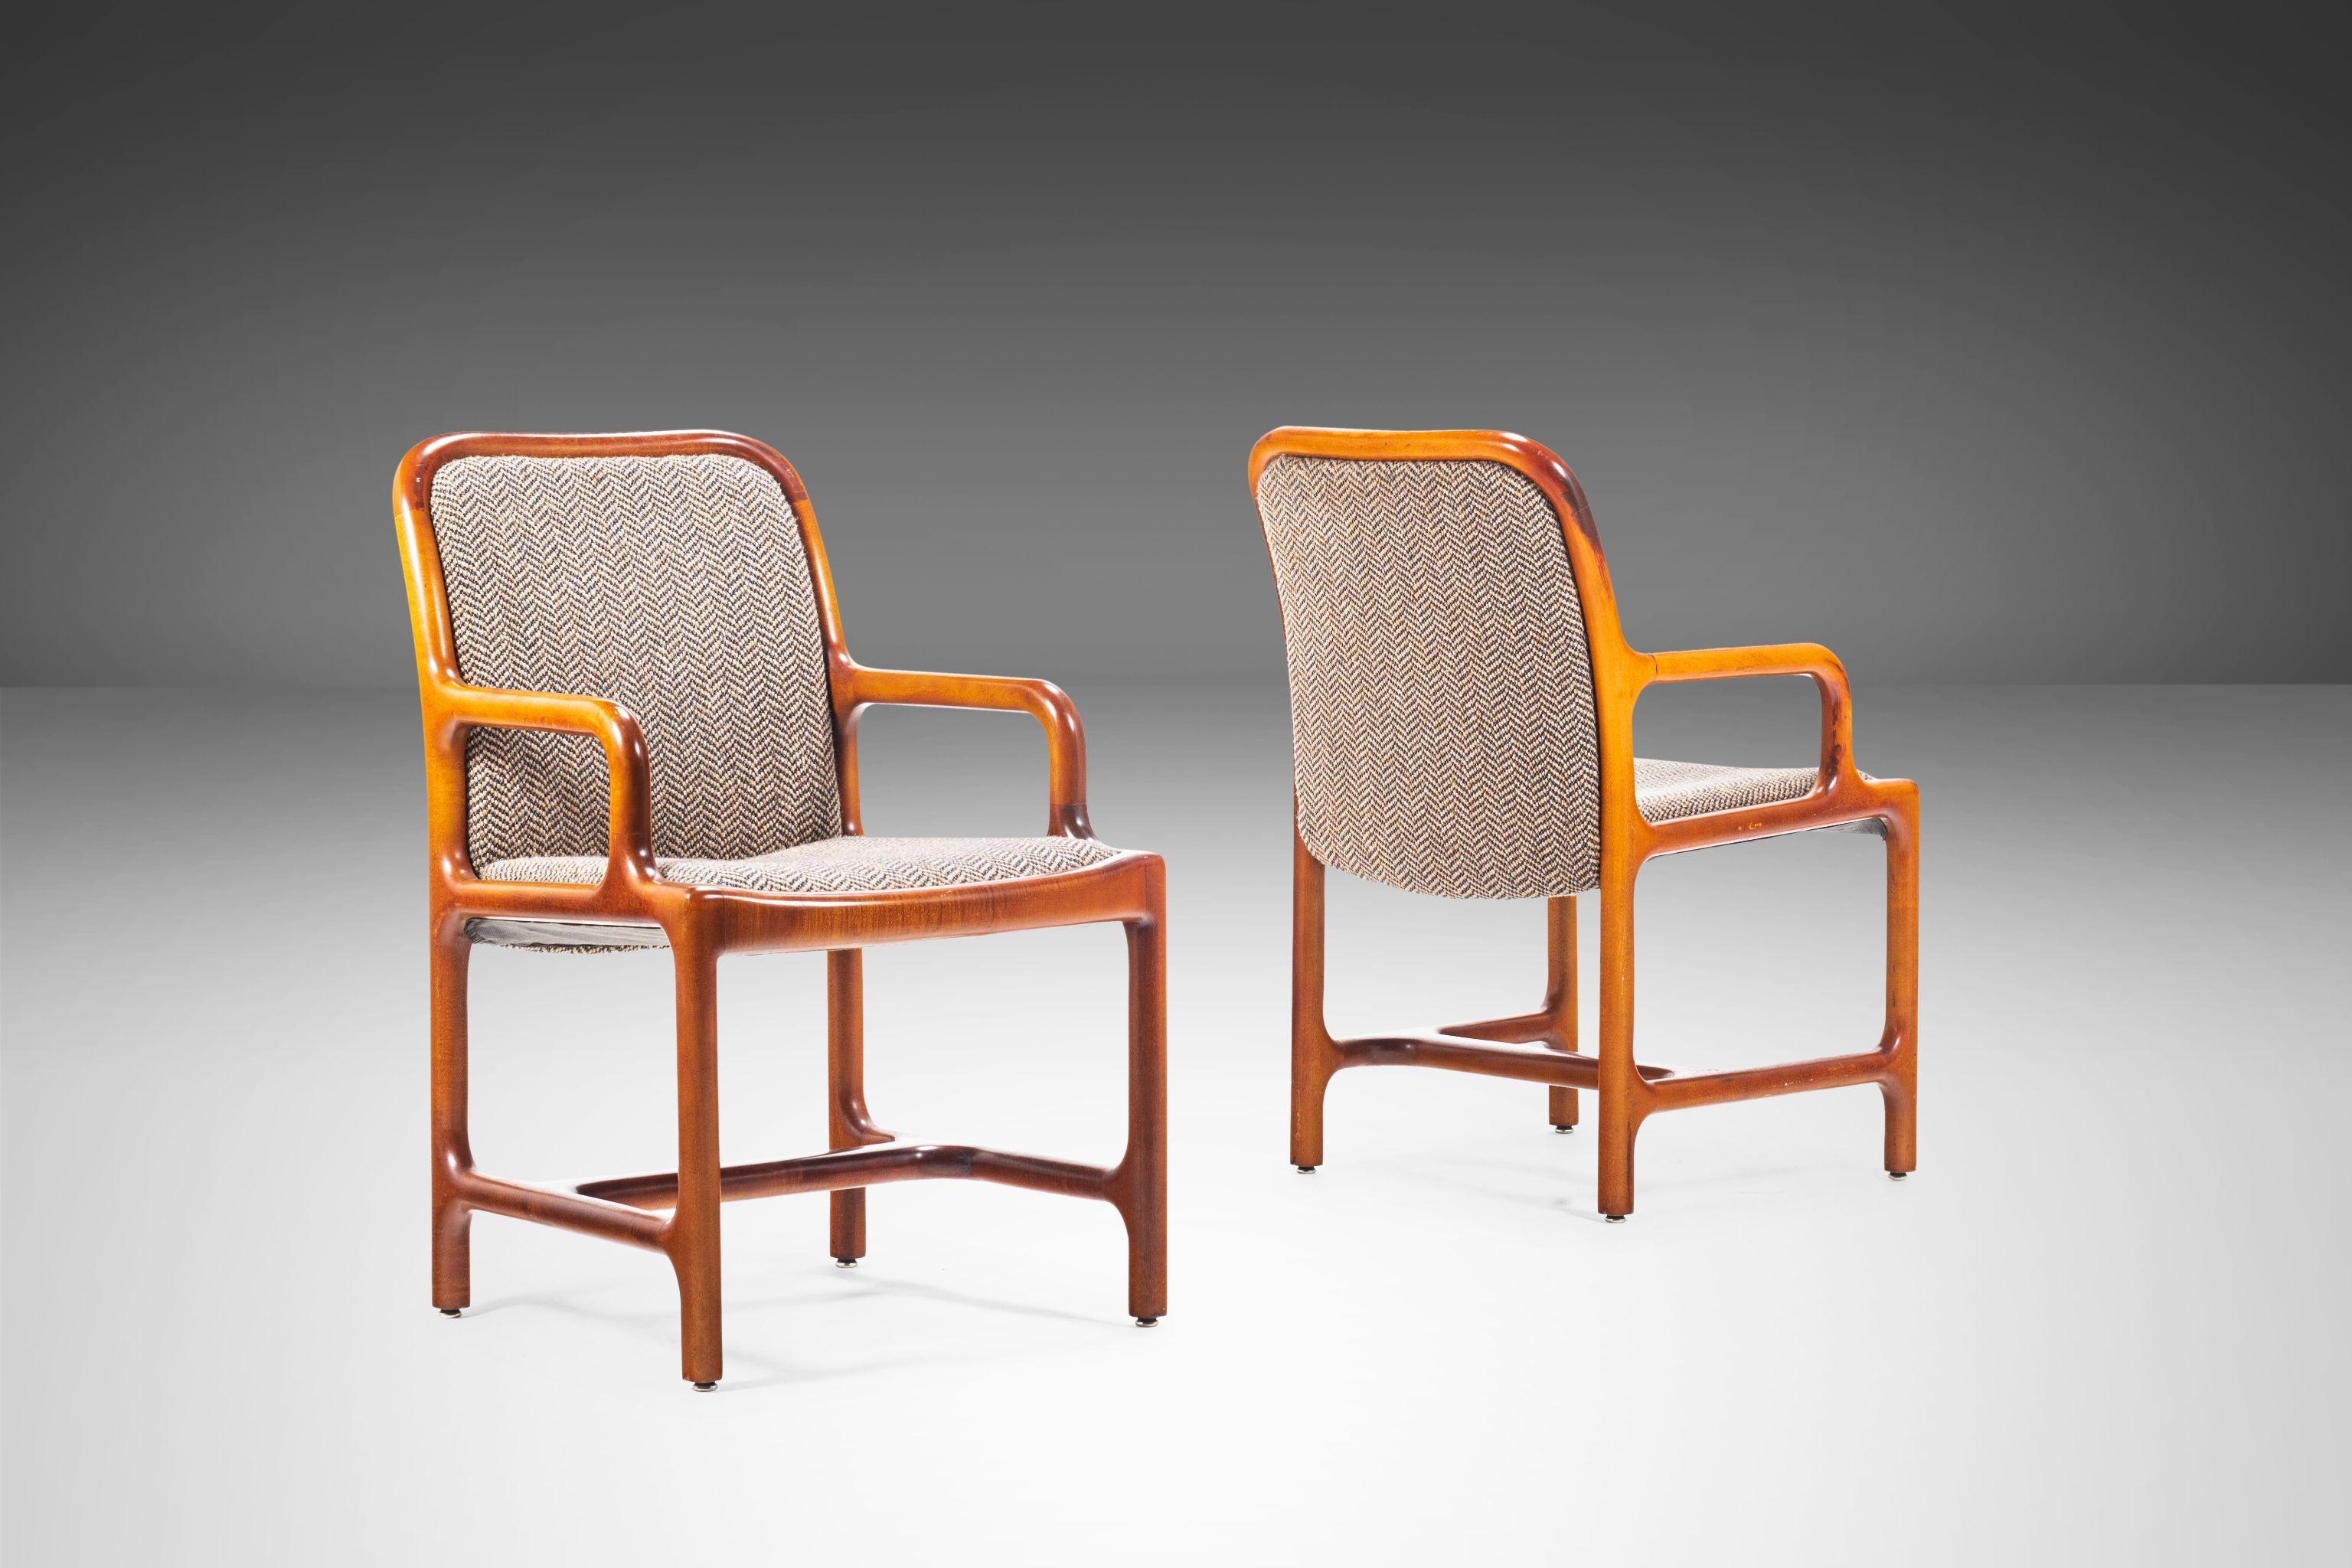 Mid-20th Century Set of Four (4) Pretzel Chairs in Oak and Original Tweed Fabric, USA, c. 1960's For Sale